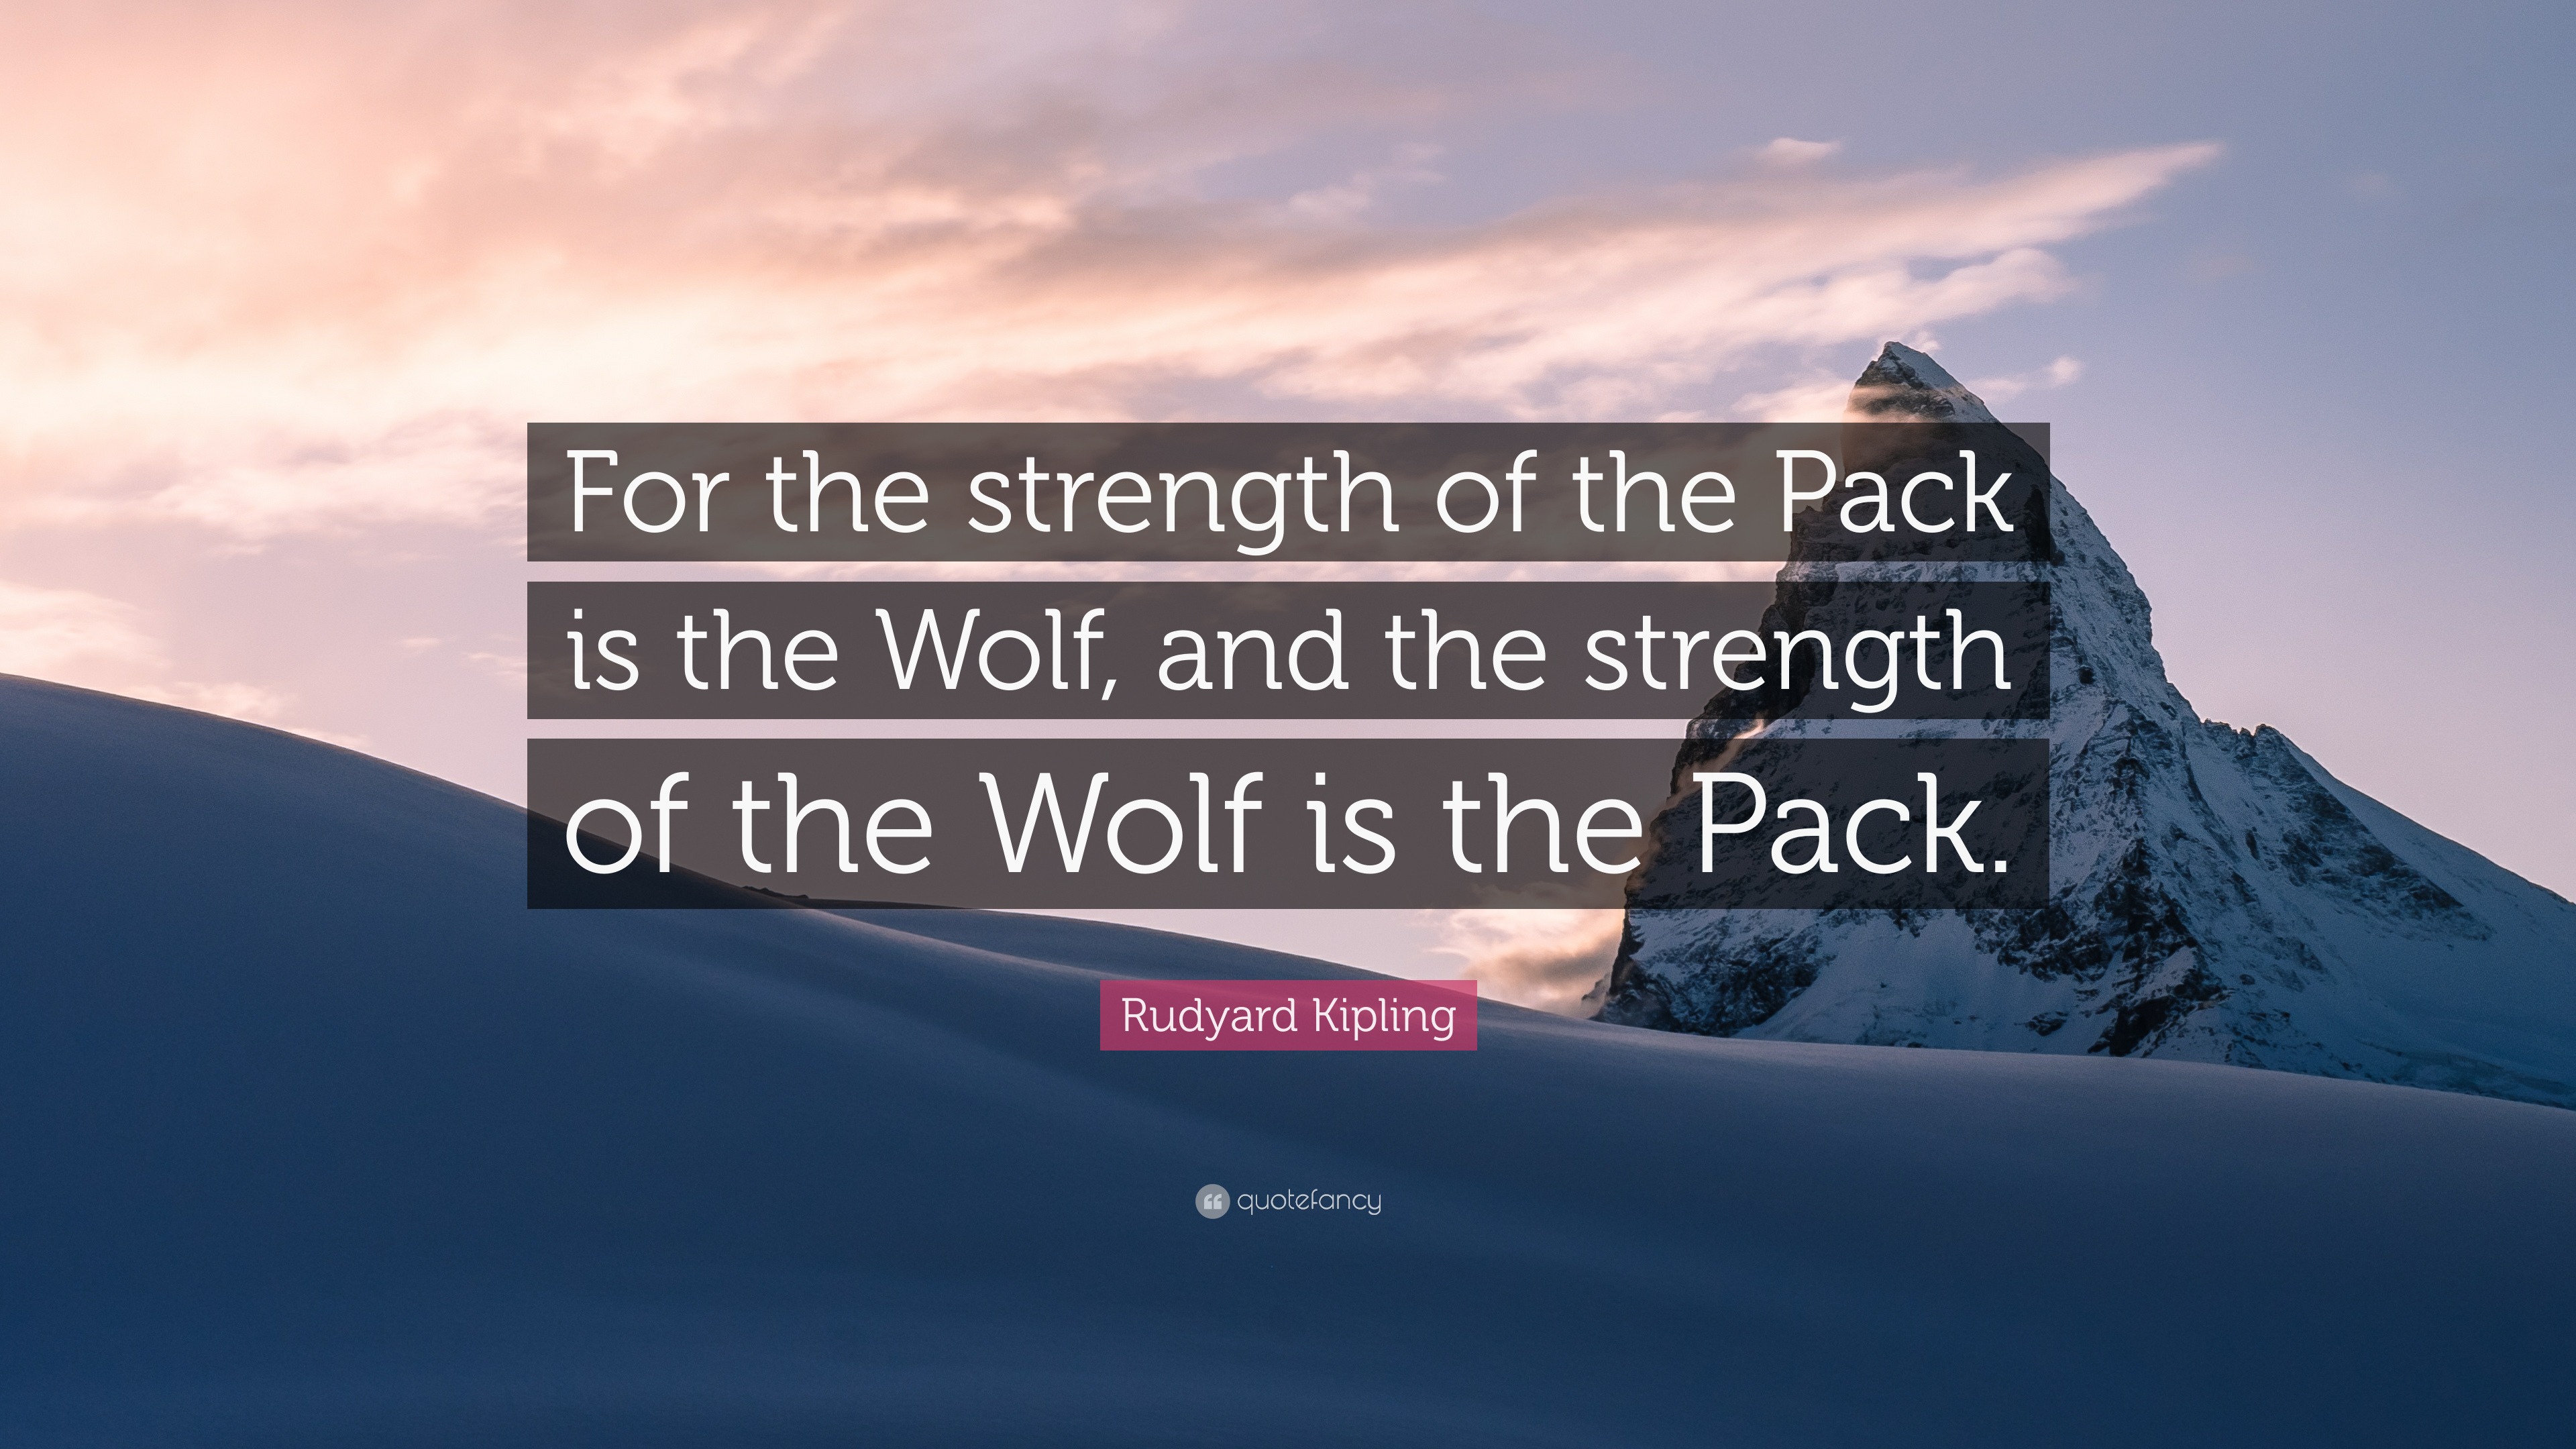 2023848 Rudyard Kipling Quote For the strength of the Pack is the Wolf and